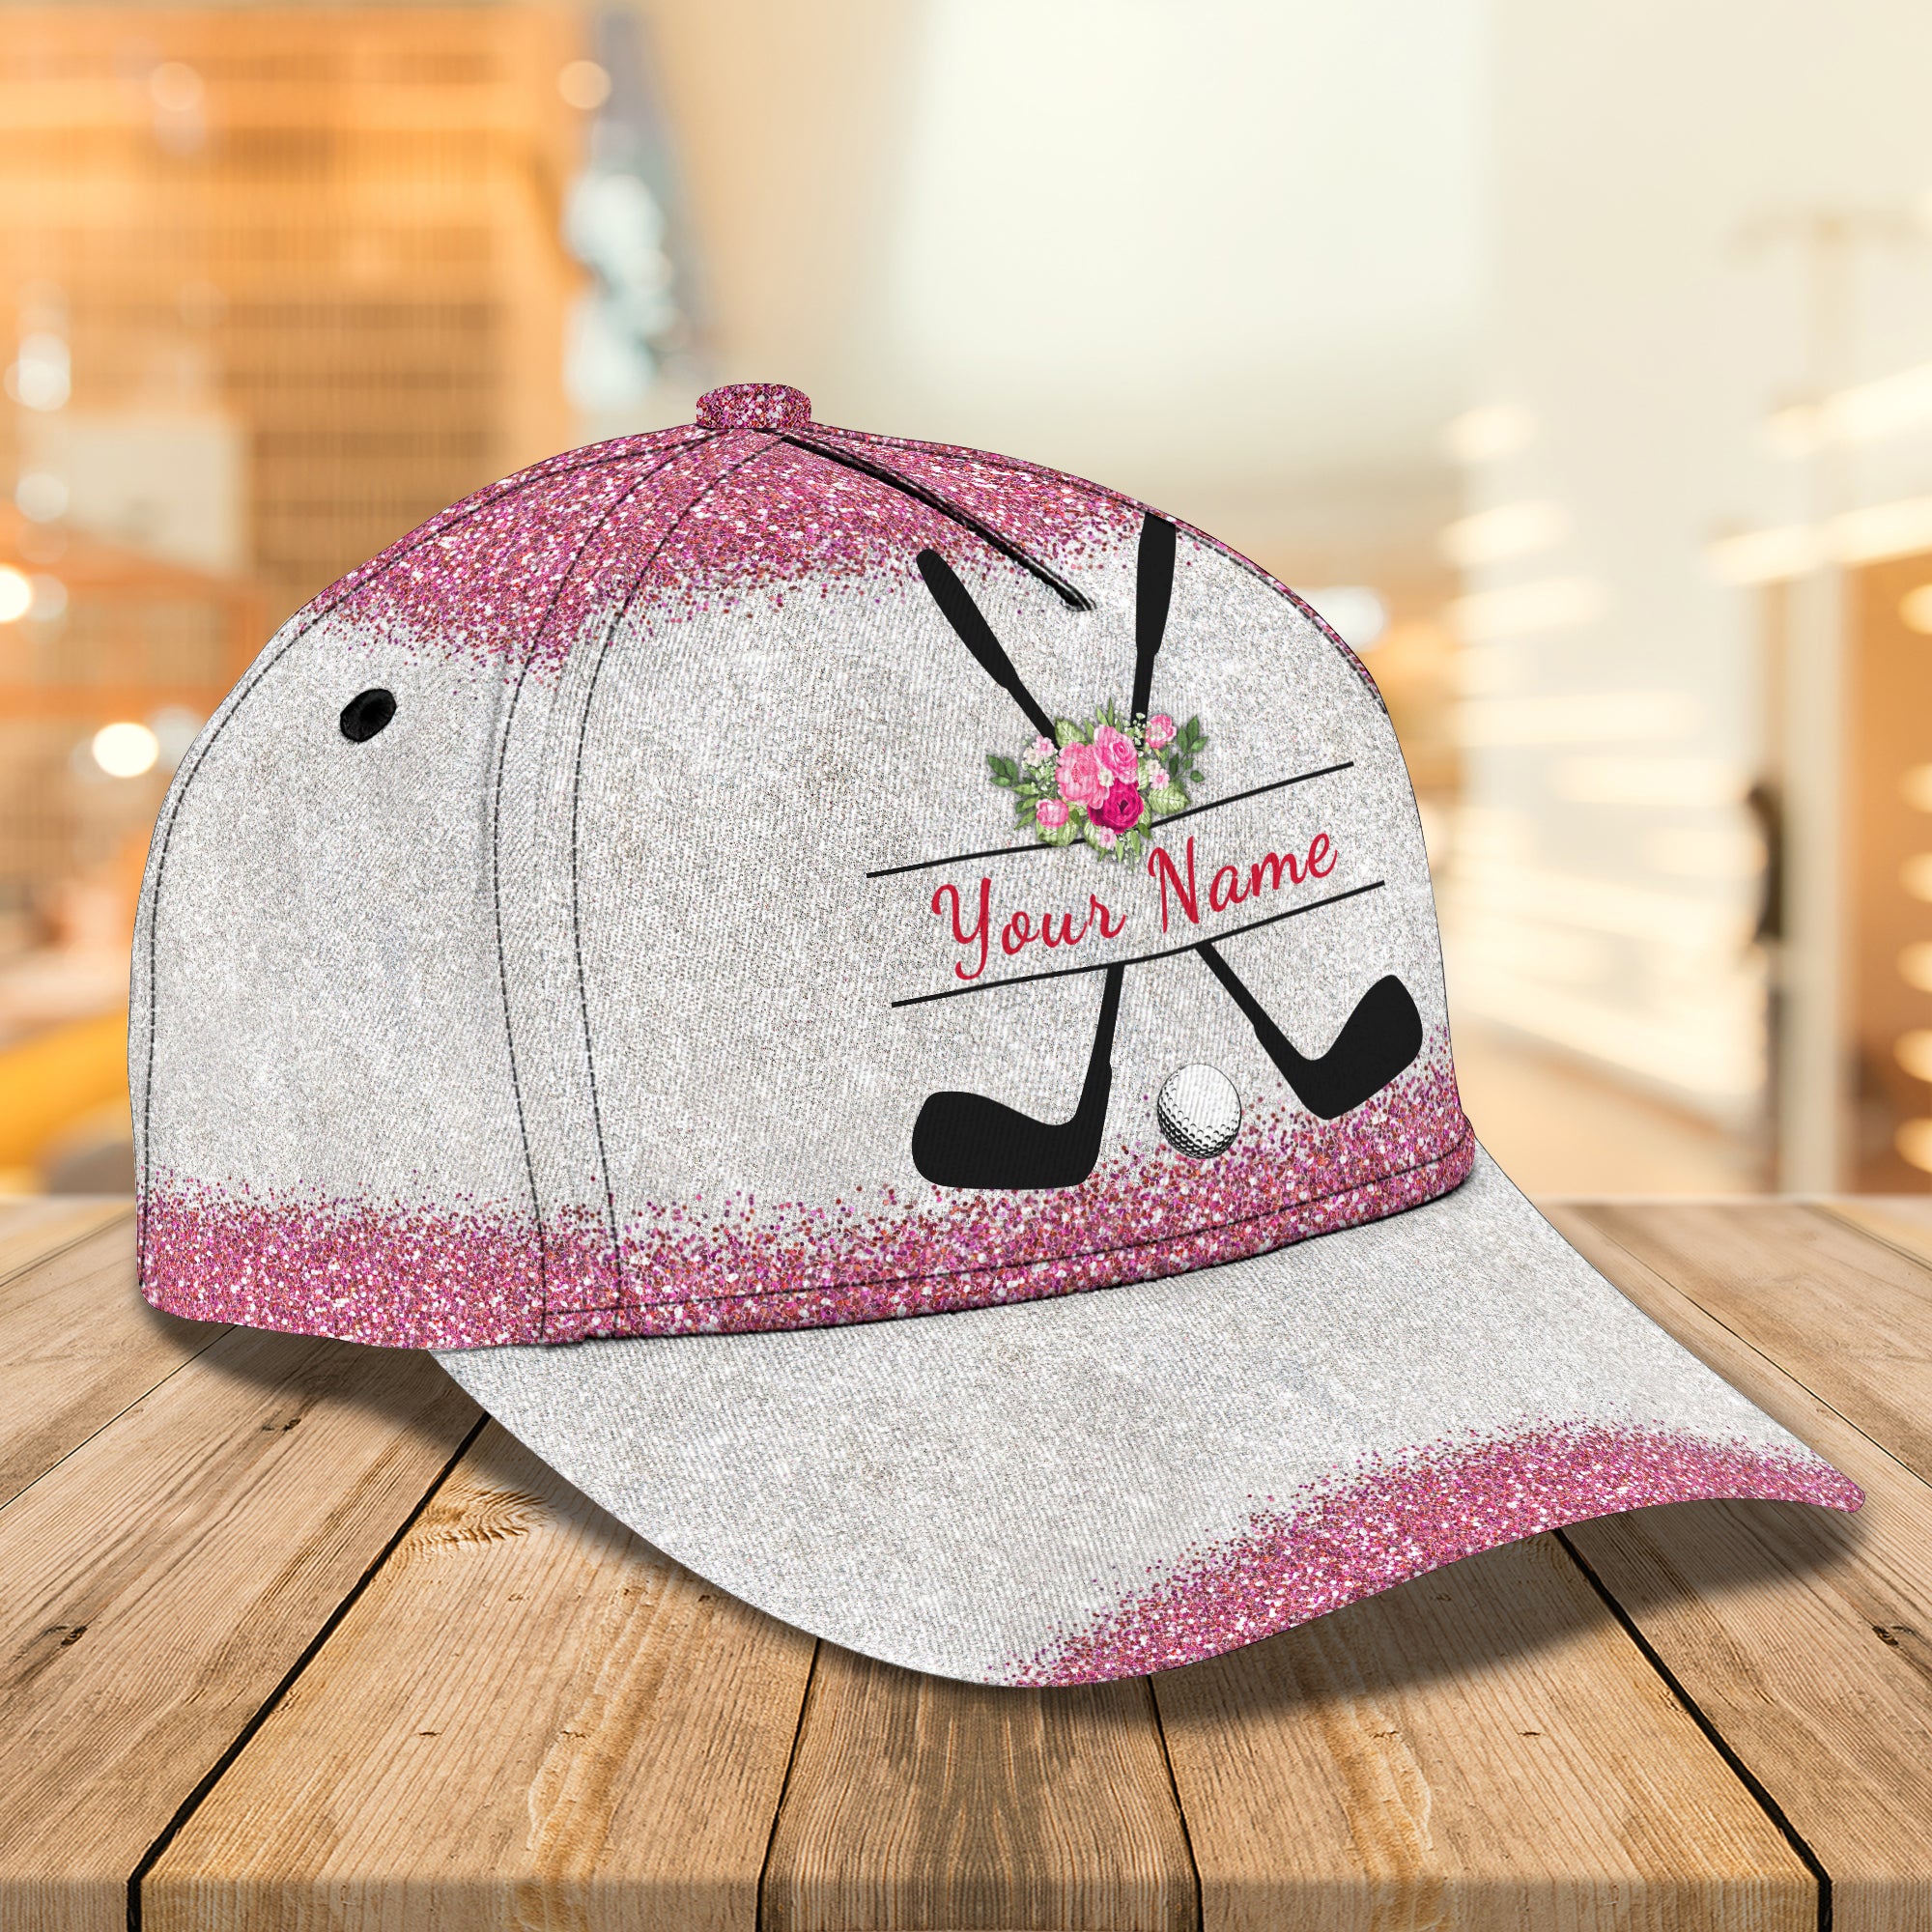 Golf - Personalized Name Cap - DAT93-013